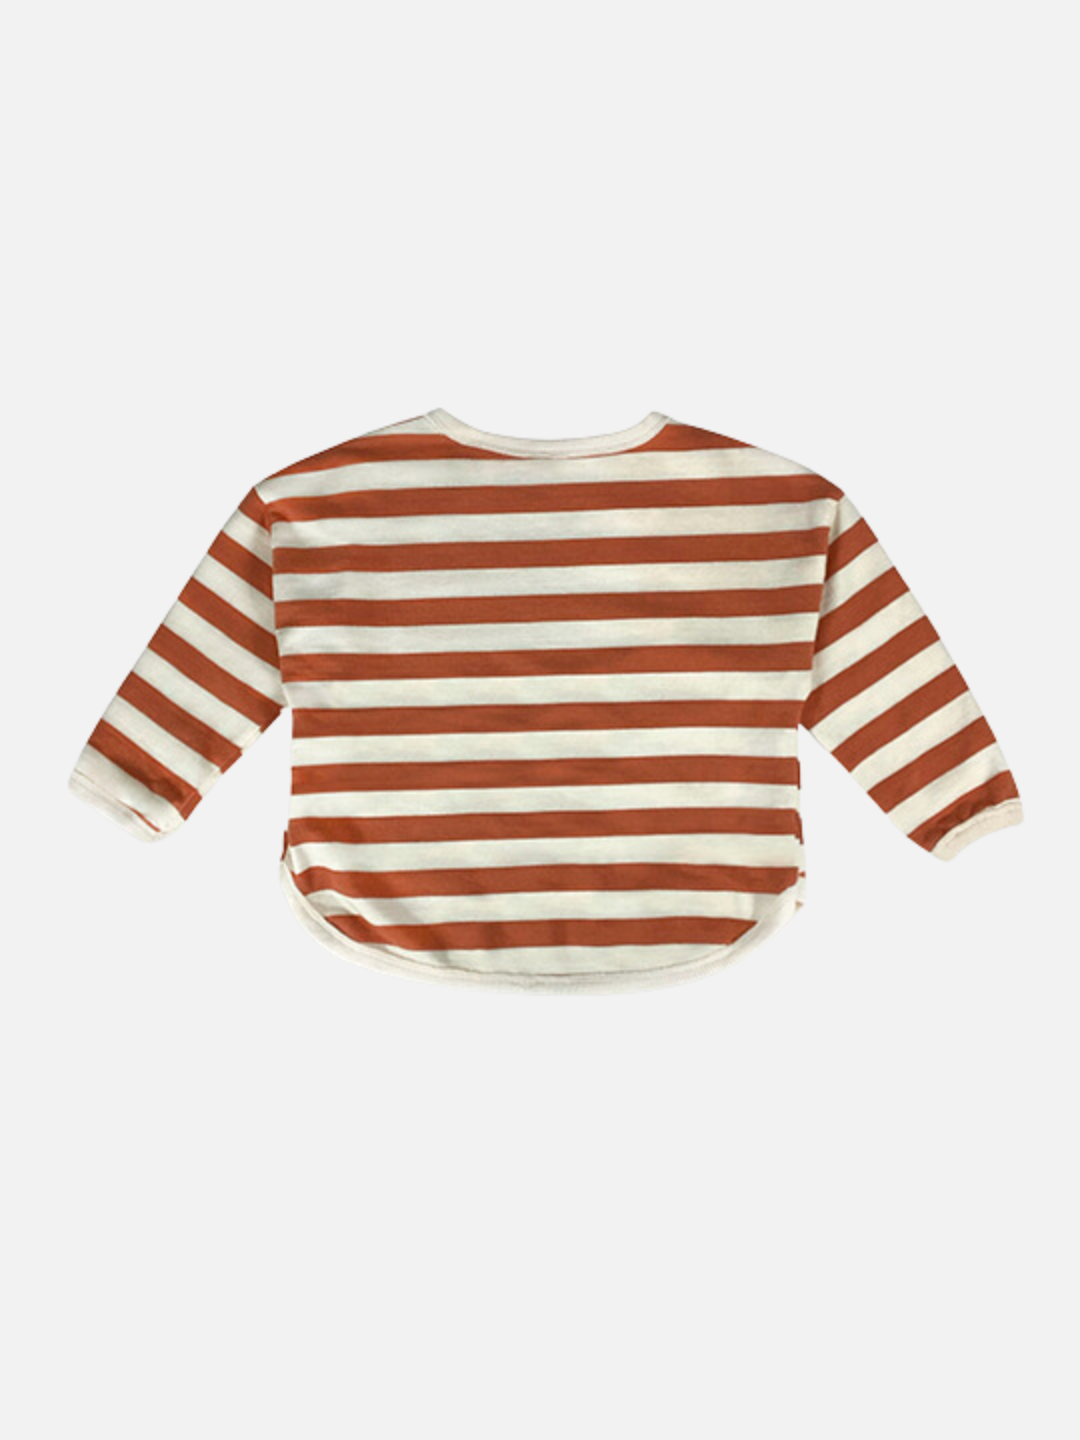 A kids' tee shirt with a curved hem in stripes of peaches and cream, back view